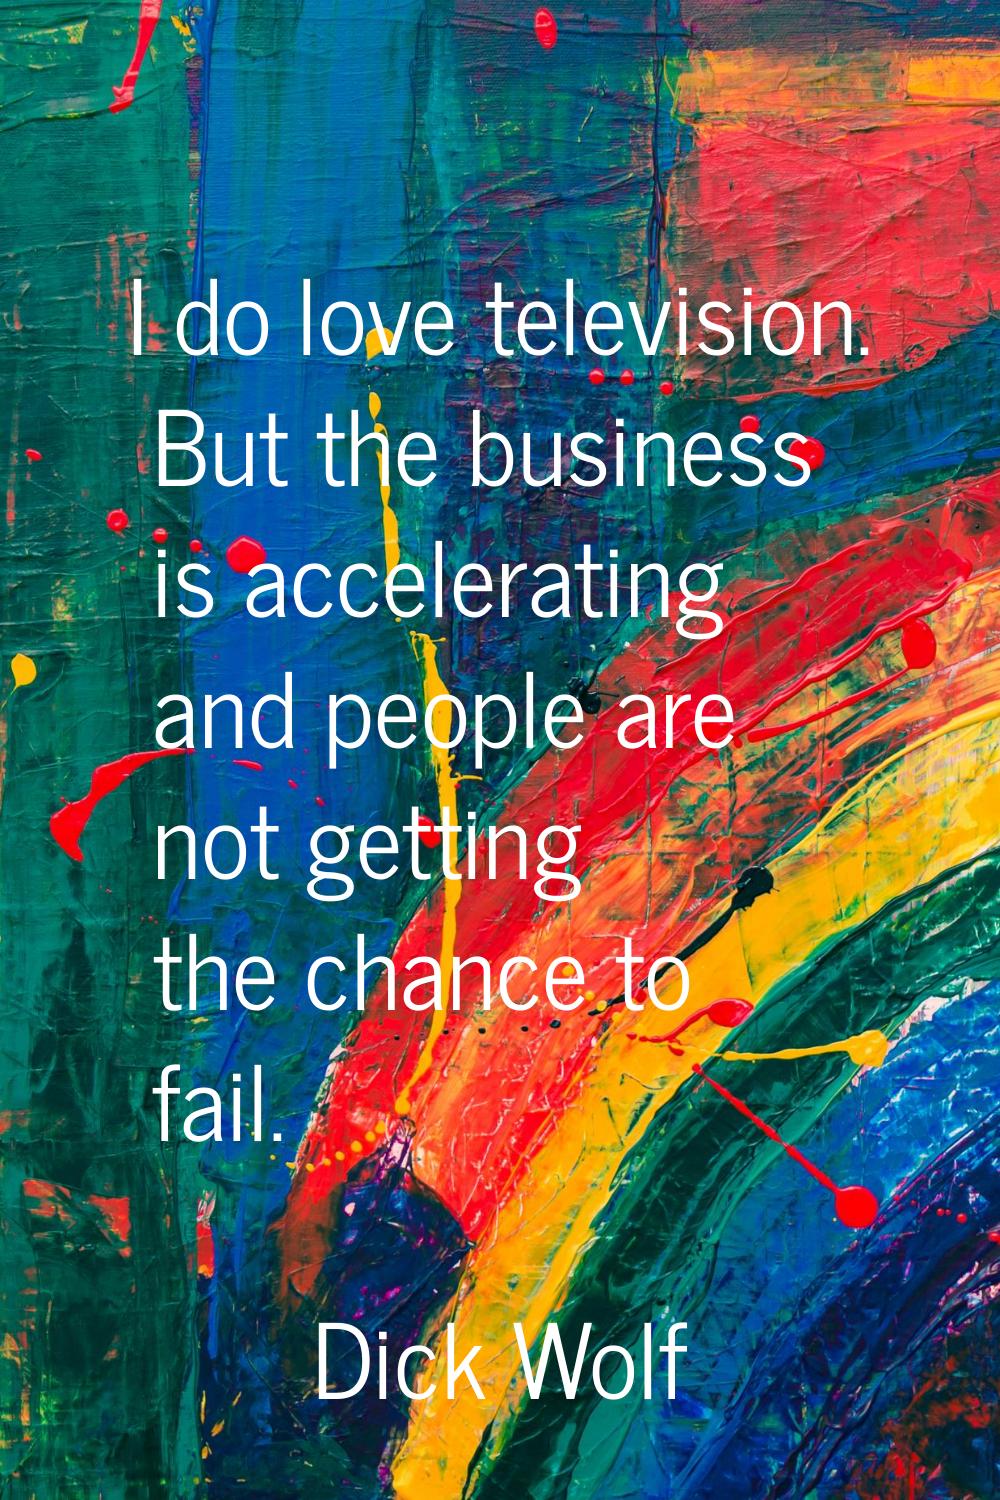 I do love television. But the business is accelerating and people are not getting the chance to fai